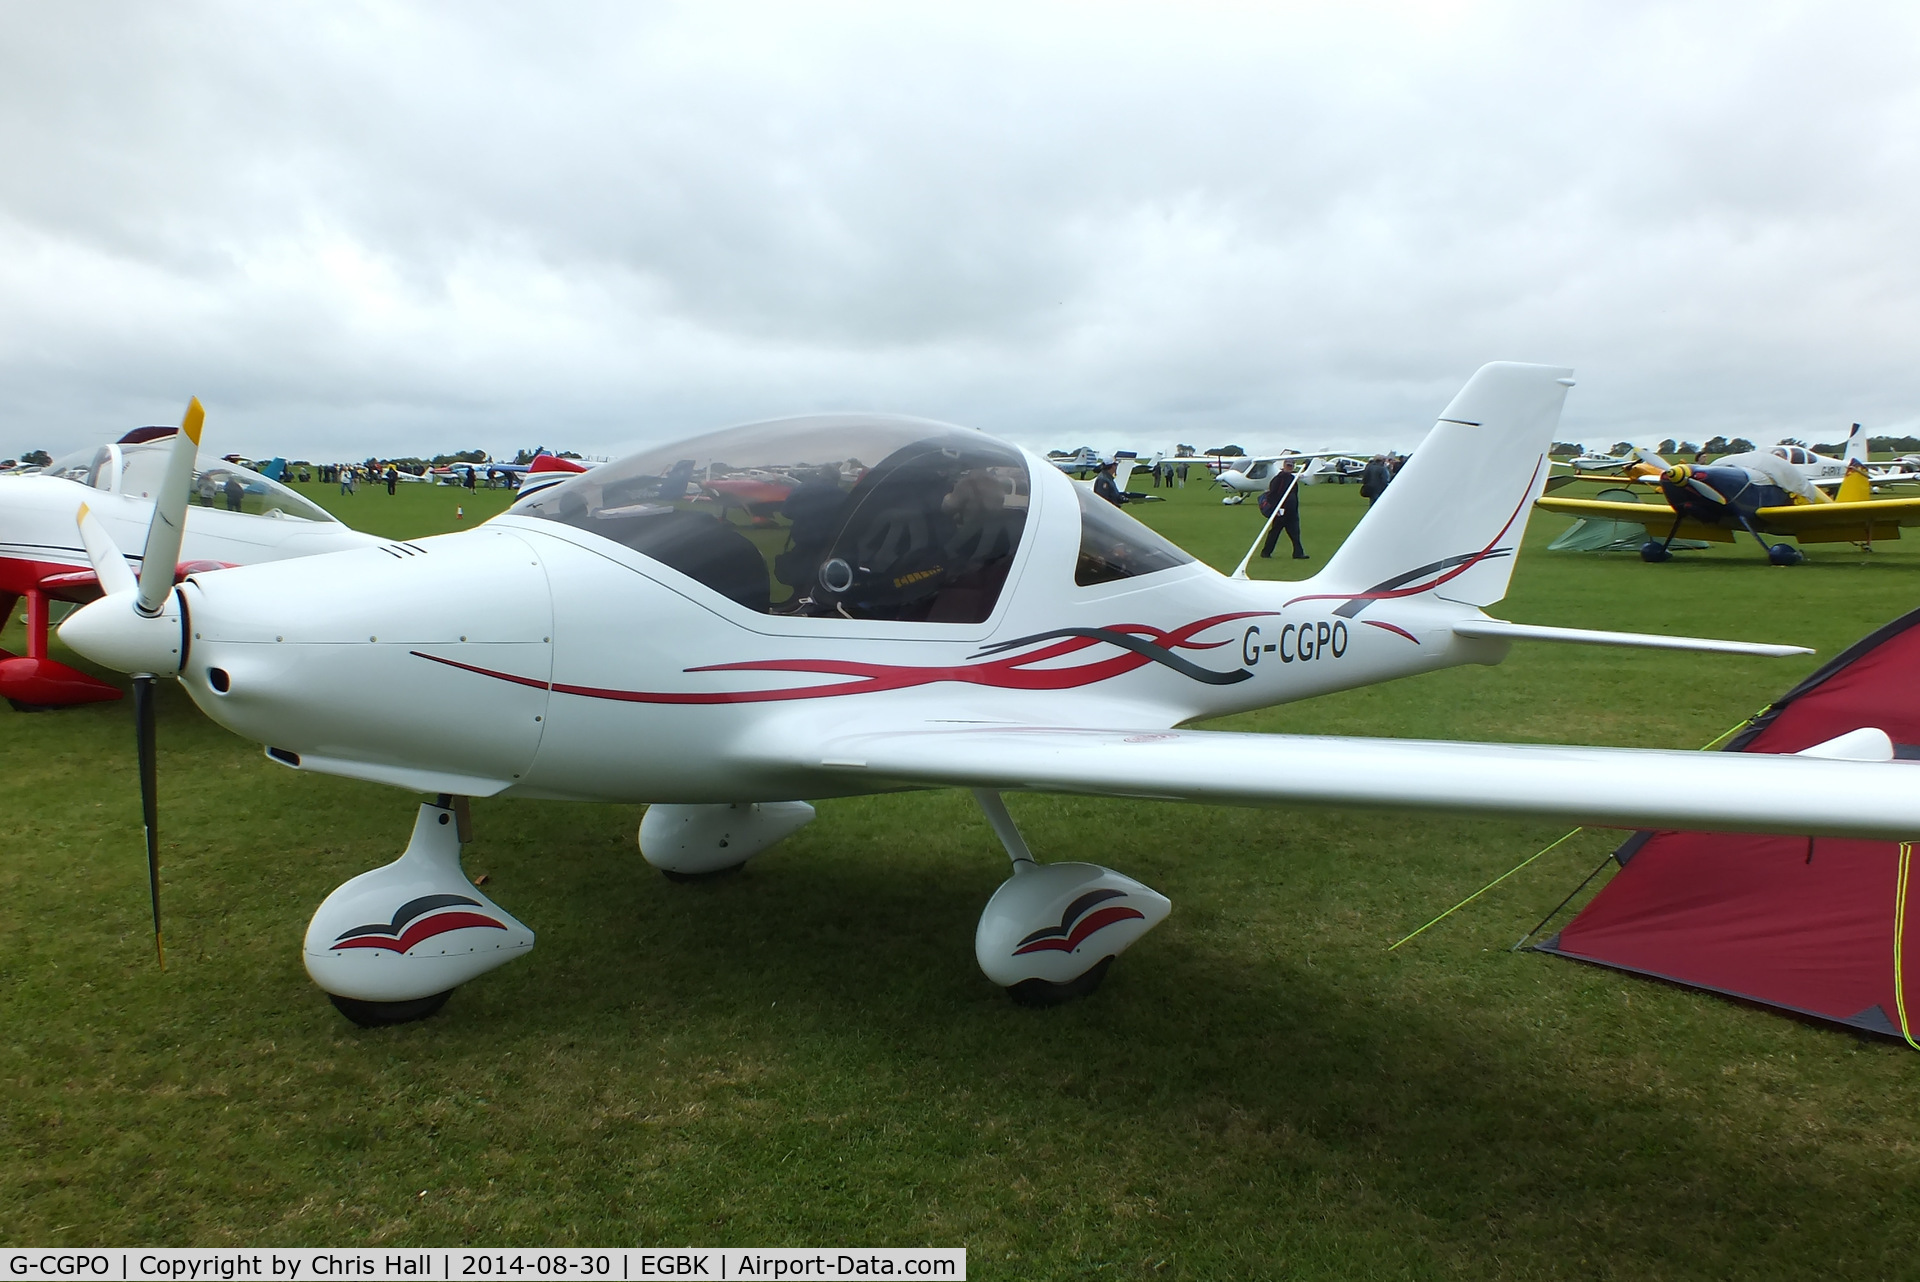 G-CGPO, 2011 TL Ultralight TL-2000UK Sting Carbon C/N LAA 347-14896, at the LAA Rally 2014, Sywell